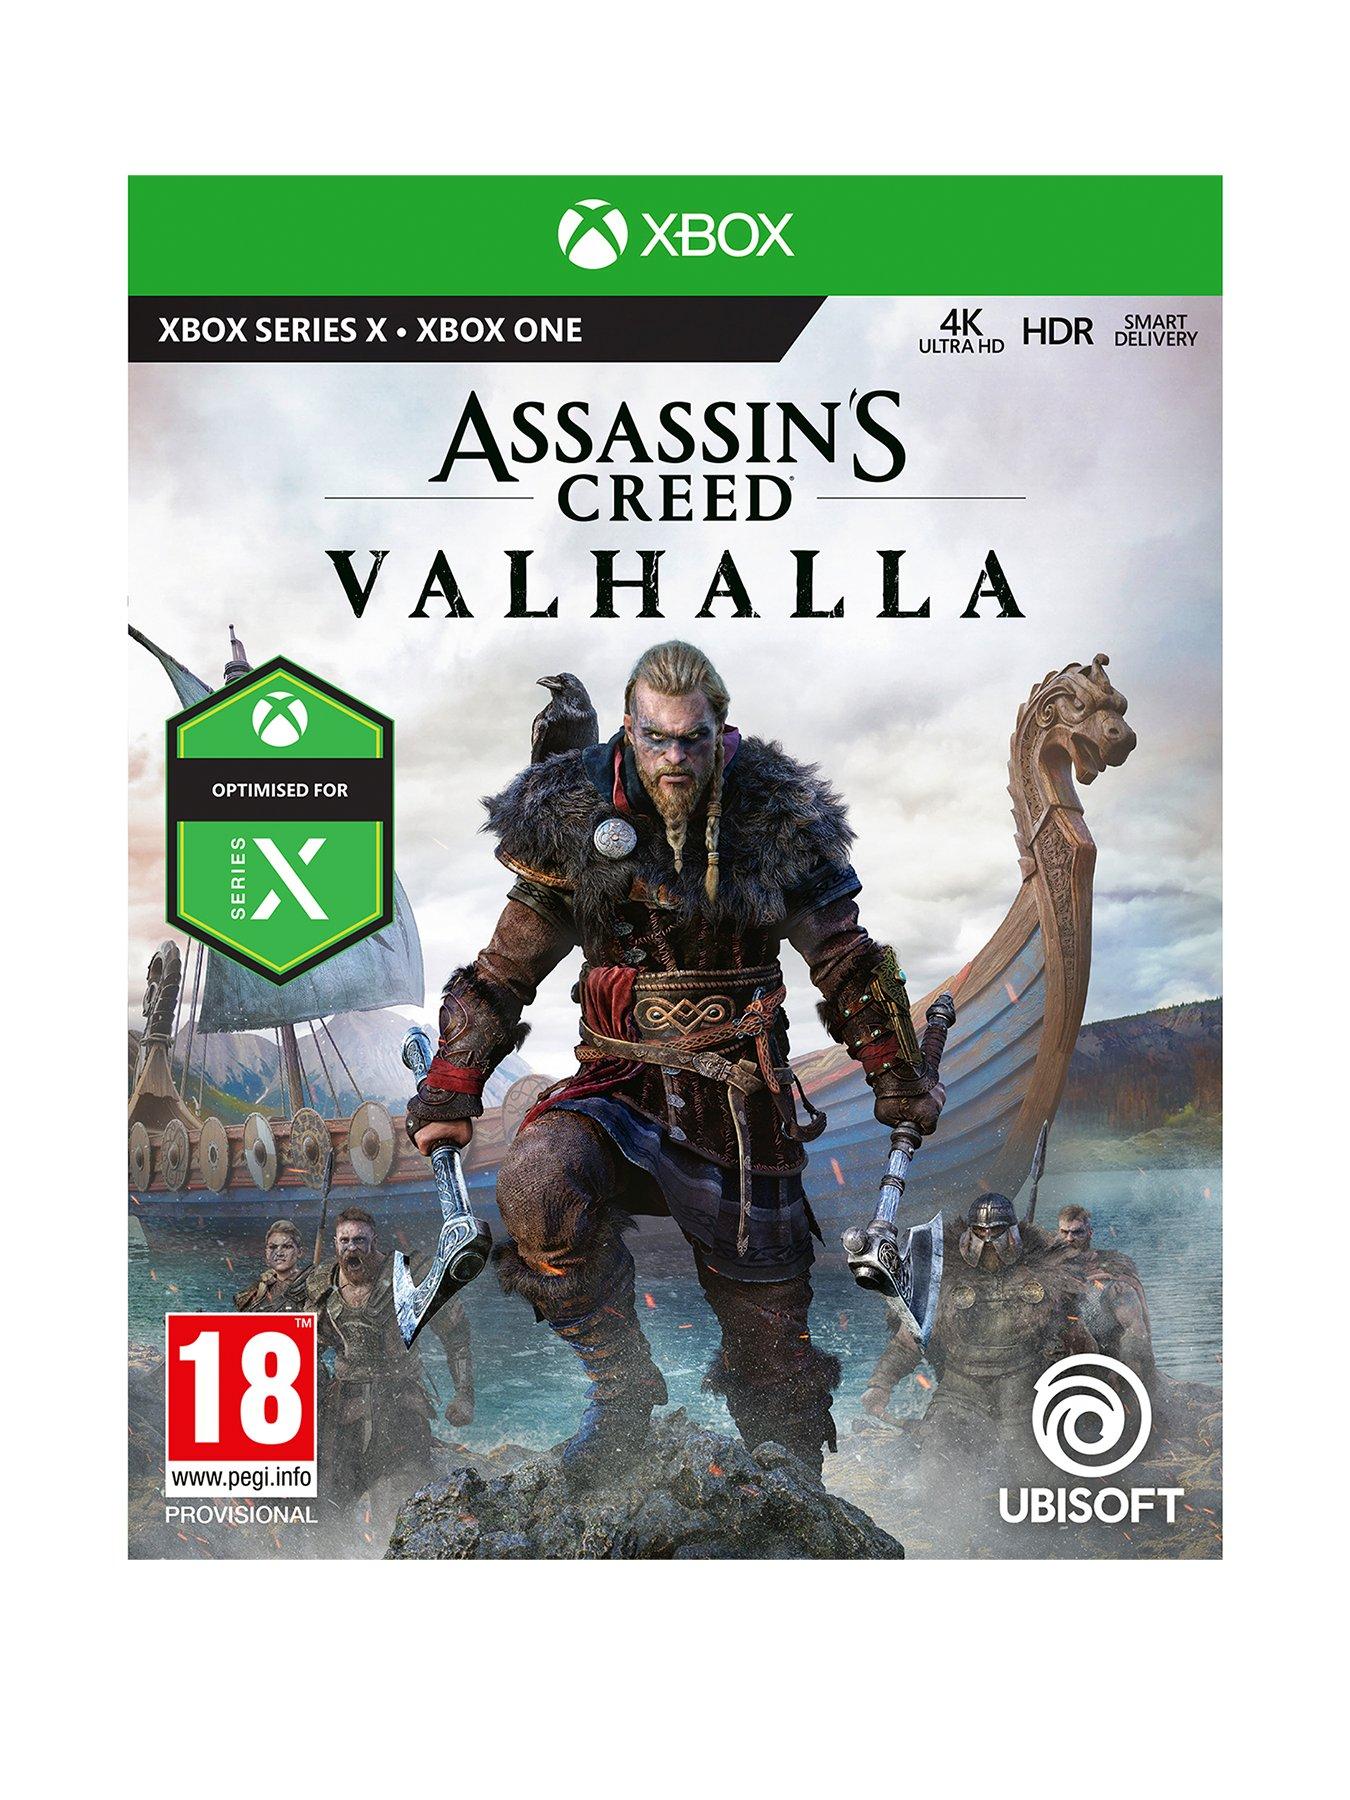 assassin's creed valhalla on xbox one